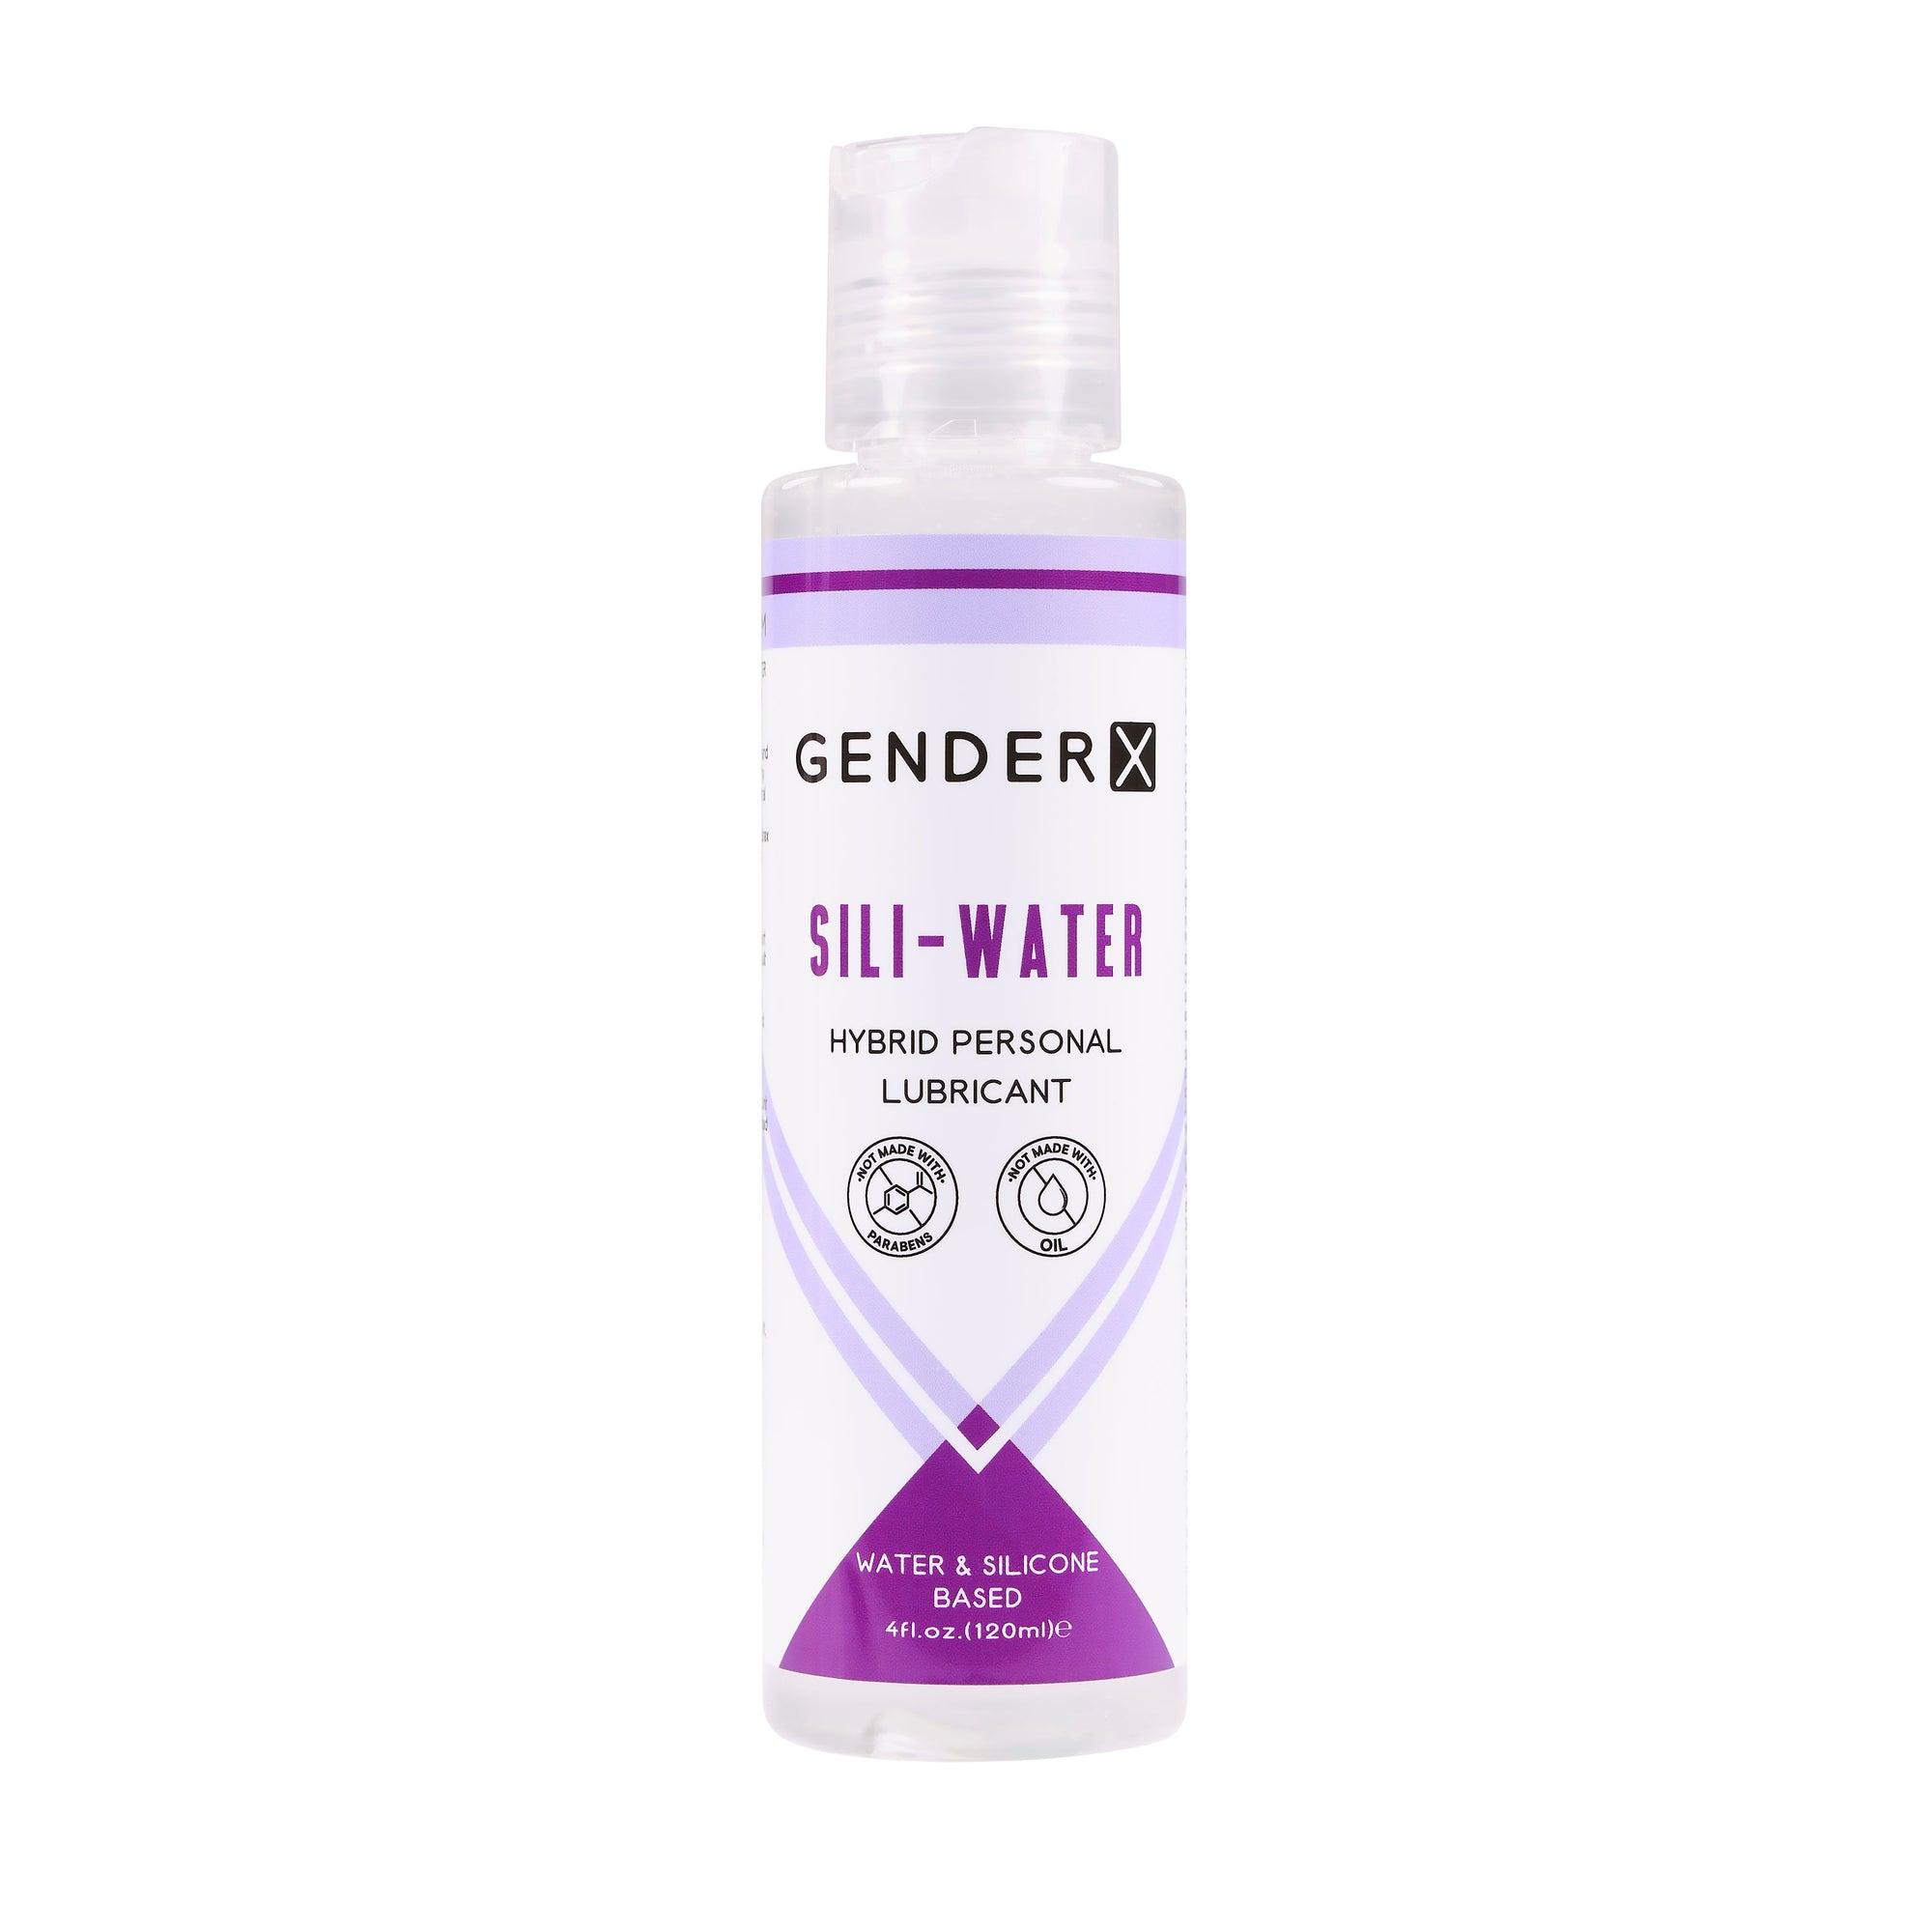 Evolved - Gender X Sili Water Hybrid Personal Lubricant